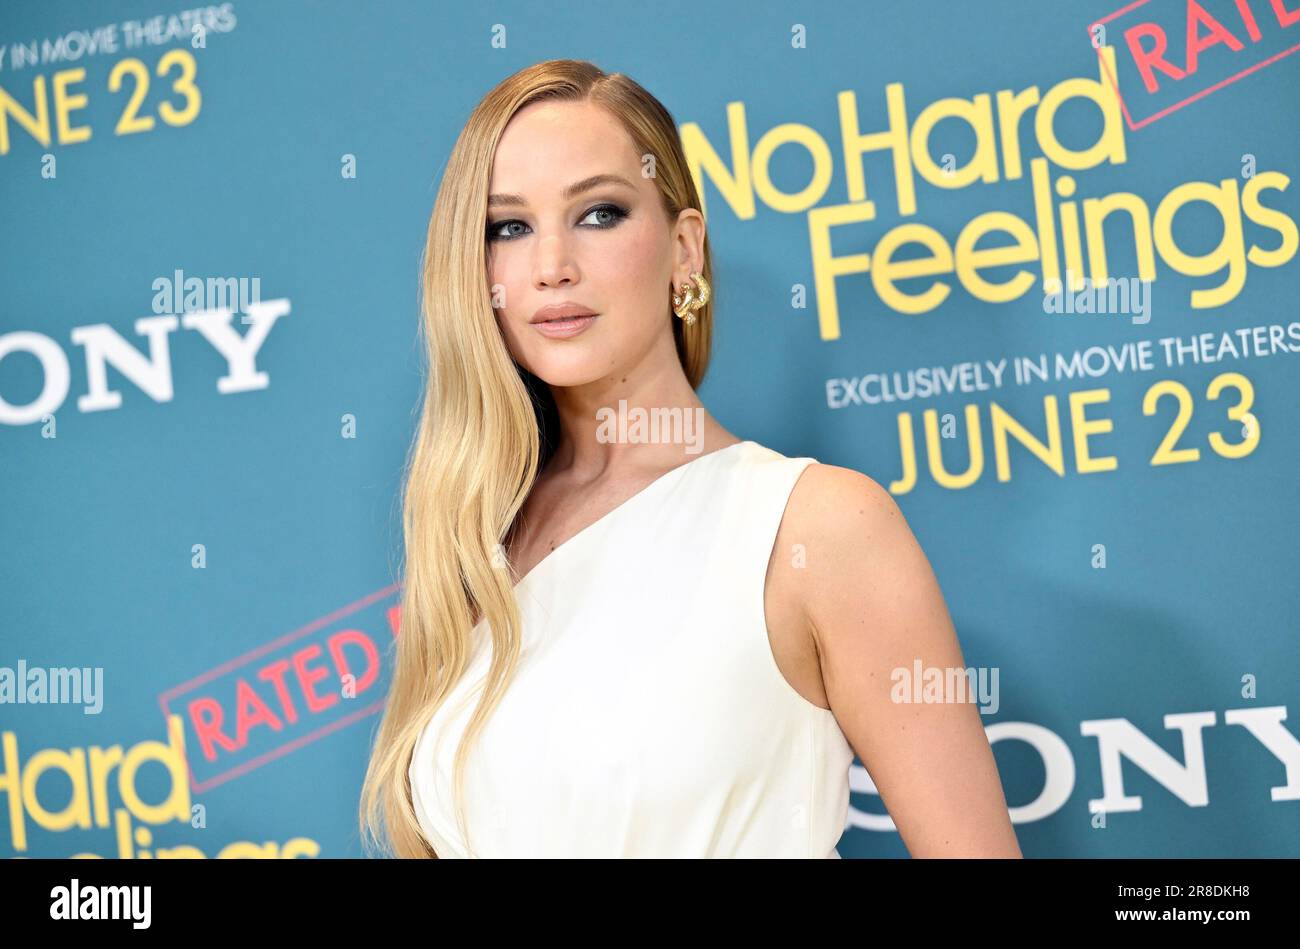 https://c8.alamy.com/comp/2R8DKH8/jennifer-lawrence-attends-the-premiere-for-no-hard-feelings-at-amc-lincoln-square-on-tuesday-june-20-2023-in-new-york-photo-by-evan-agostiniinvisionap-2R8DKH8.jpg